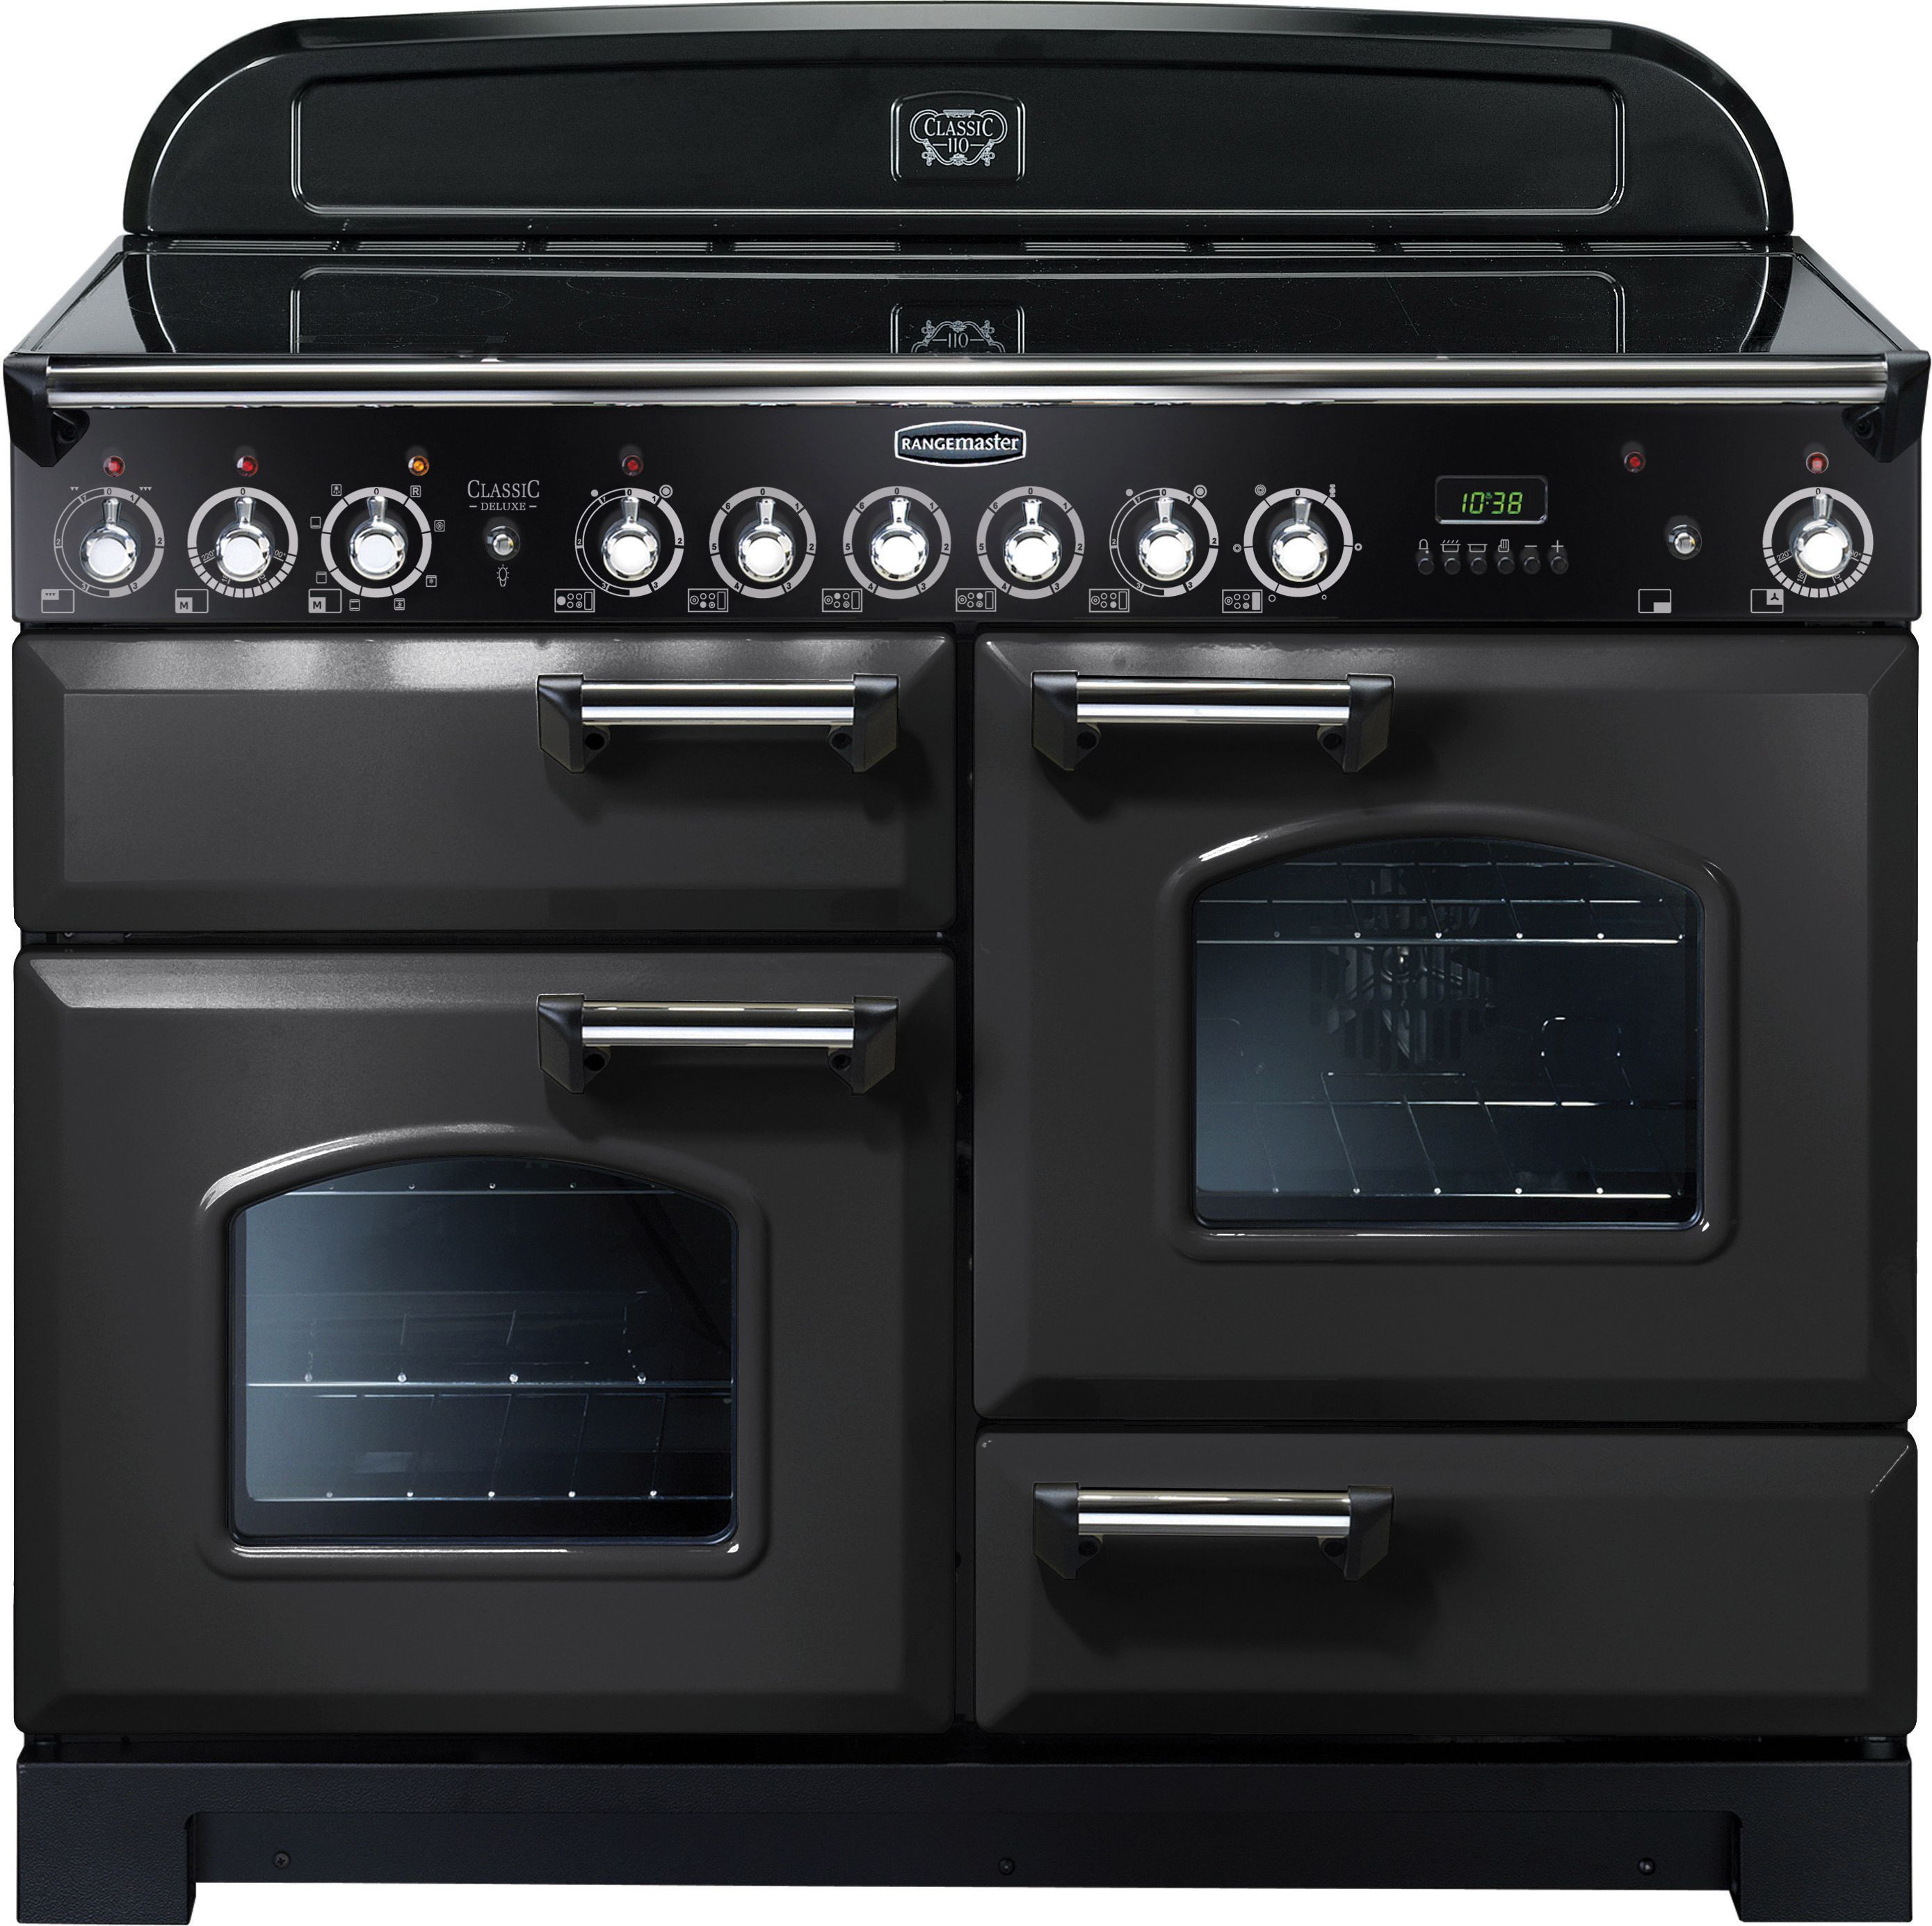 Rangemaster Classic Deluxe CDL110ECCB/C 110cm Electric Range Cooker with Ceramic Hob - Charcoal Black / Chrome - A/A Rated, Black